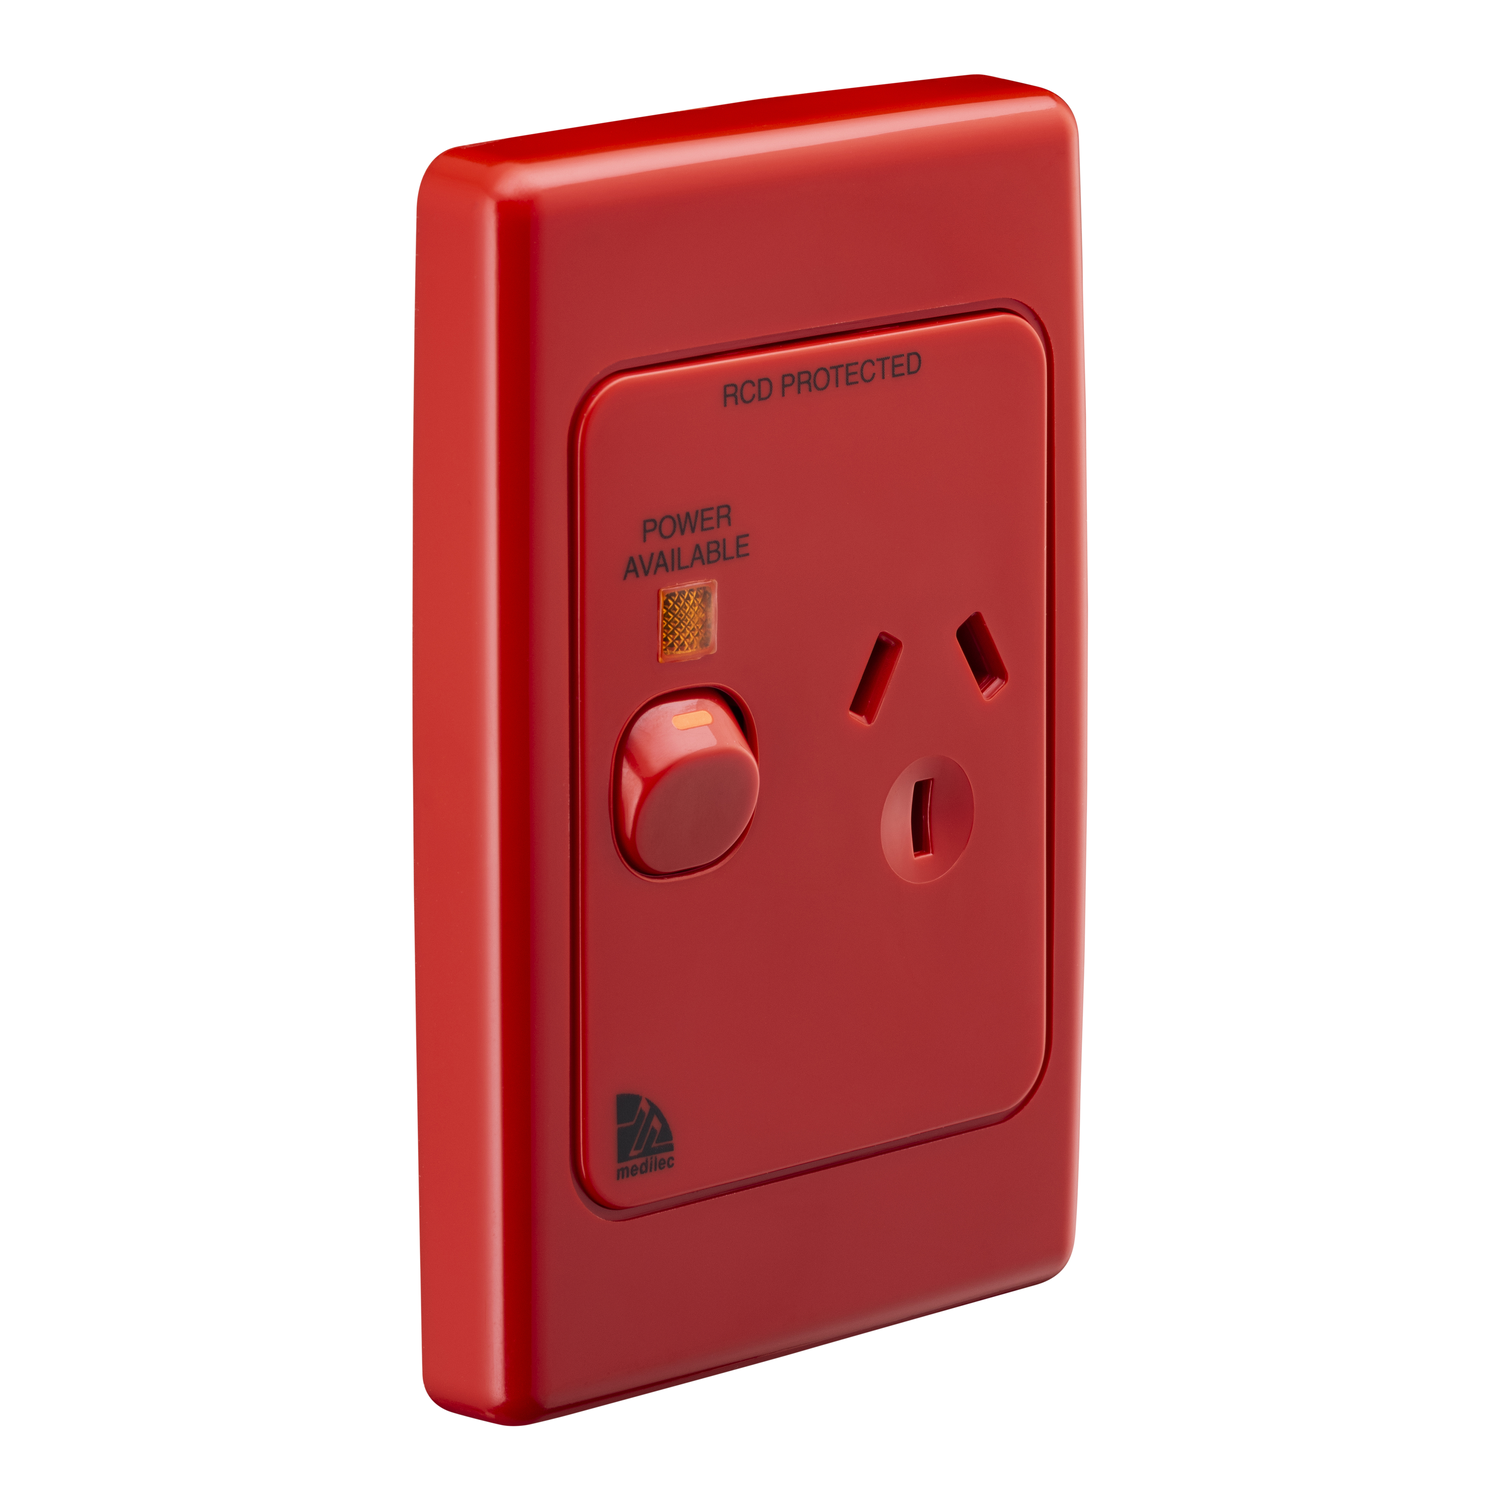 Socket Outlets Switch Vertical, Power Indicator and RCD Label